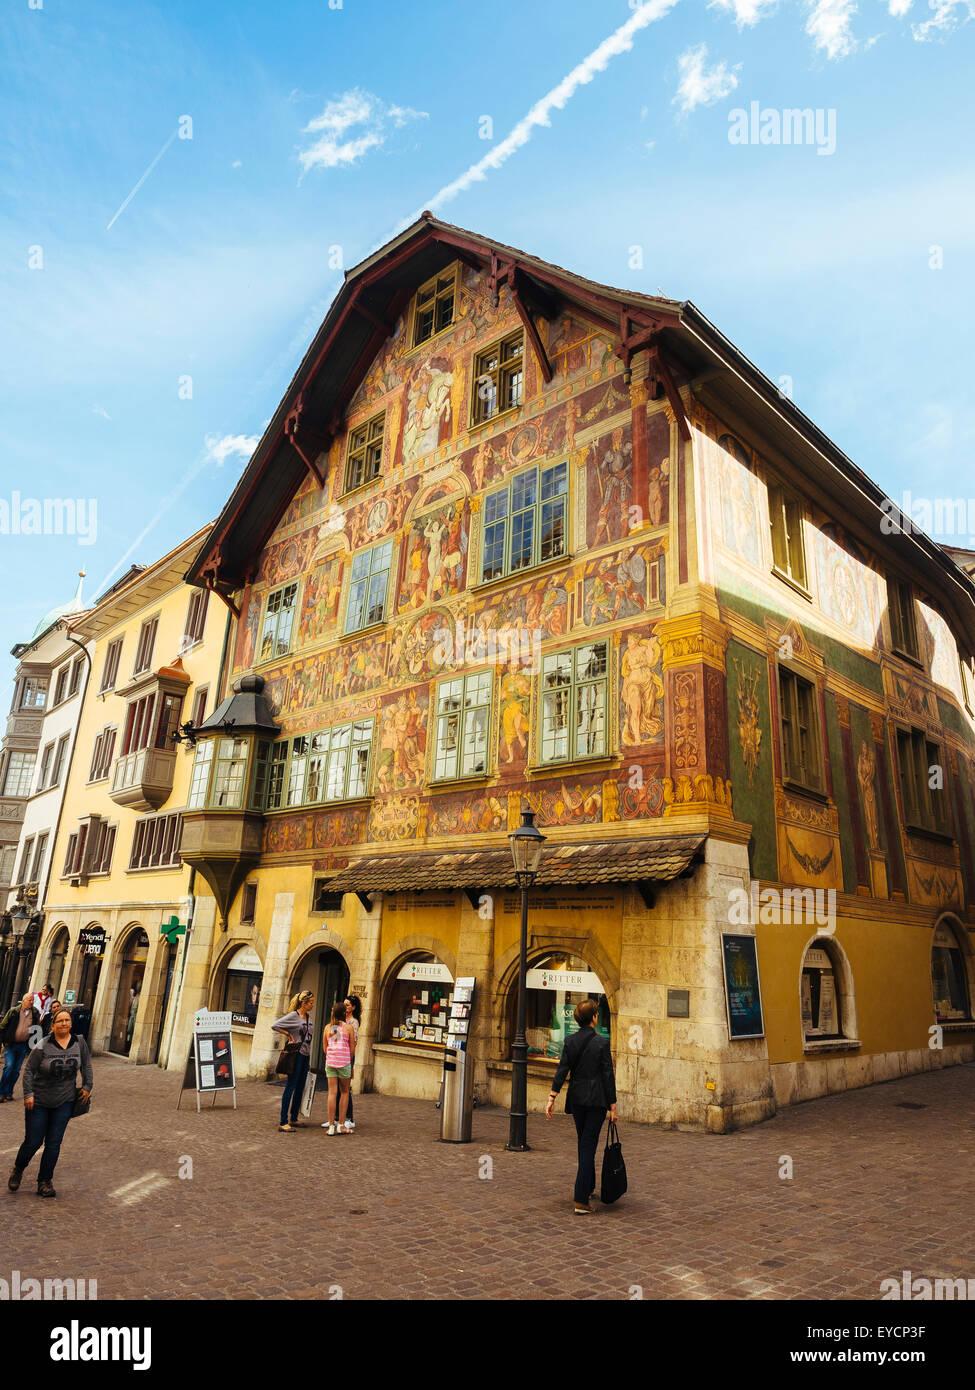 Haus Zum Ritter High Resolution Stock Photography and Images - Alamy